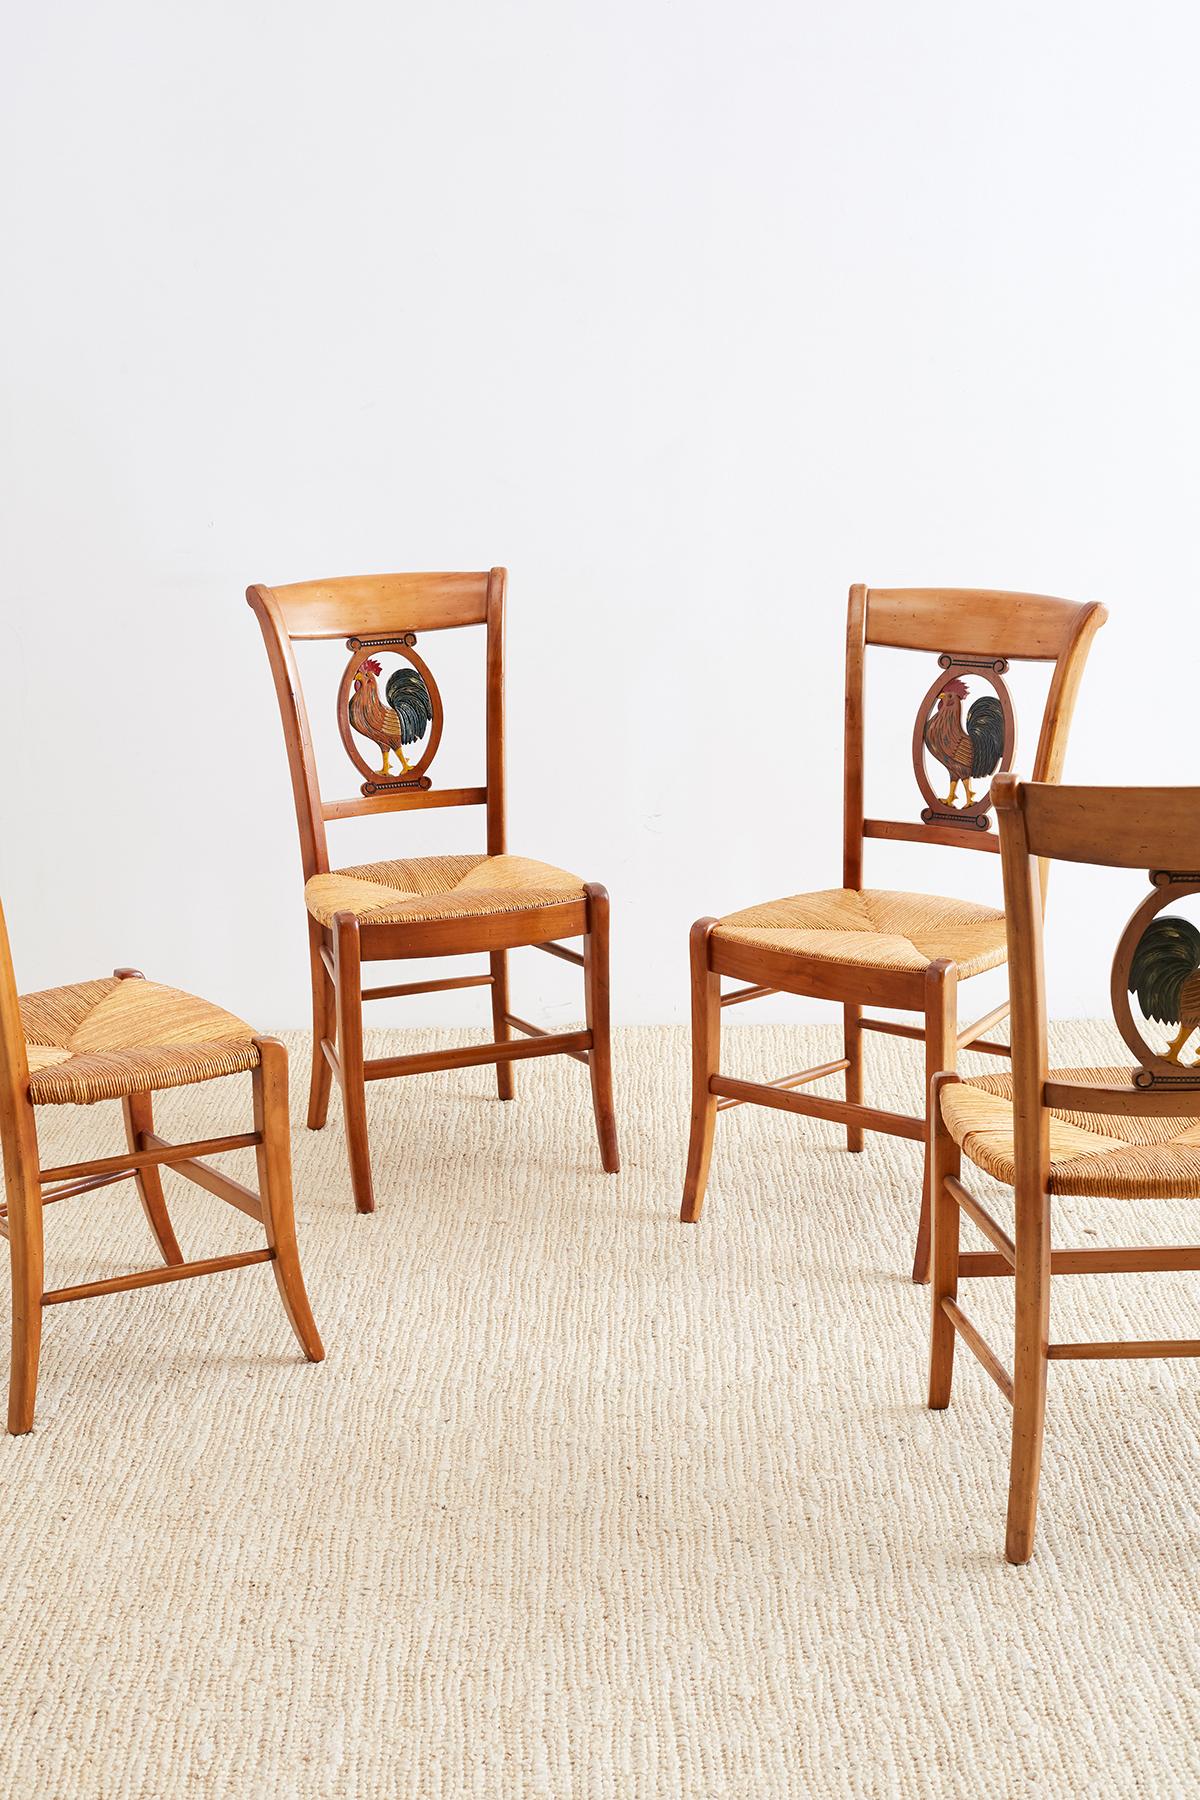 French country set of four rush seat dining chairs featuring a carved backsplat with a painted rooster. handmade in the French Provincial style from fruitwood each chair is signed by artisan on bottom. Unique and charming with excellent joinery and